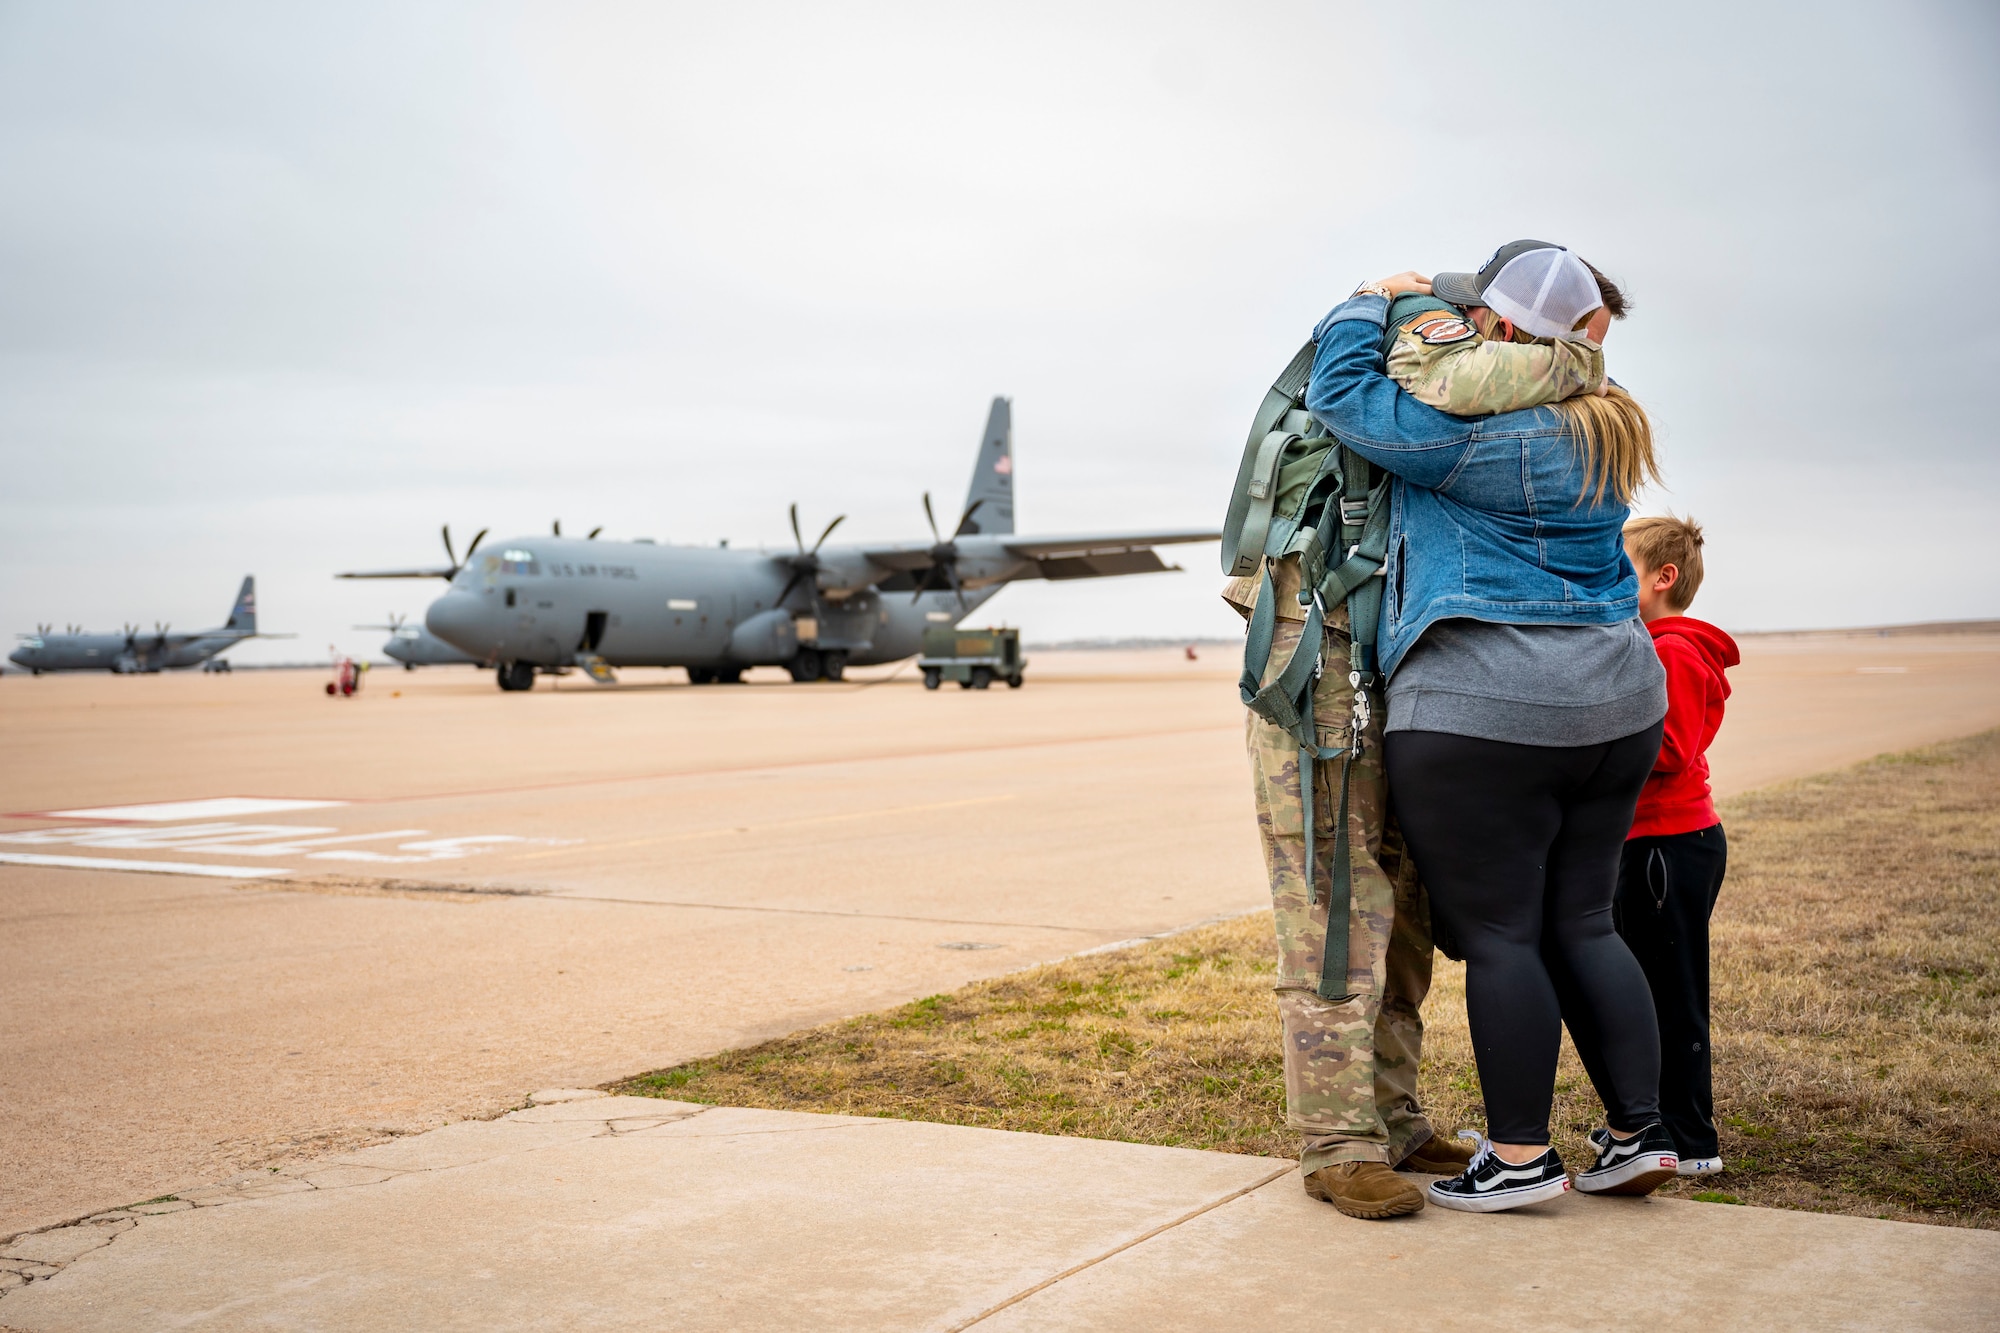 A U.S. Air Force Airman assigned to the 317th Airlift Wing hugs his family goodbye before leaving for a deployment at Dyess Air Force Base, Texas, Feb. 25, 2023. Members from the 317th were deployed to the Middle East in support of the U.S. Central Command’s continued mission of enabling military operations and activities with allies and partners to increase regional security and stability in support of enduring U.S. interests. (U.S. Air Force photo by Senior Airman Leon Redfern)